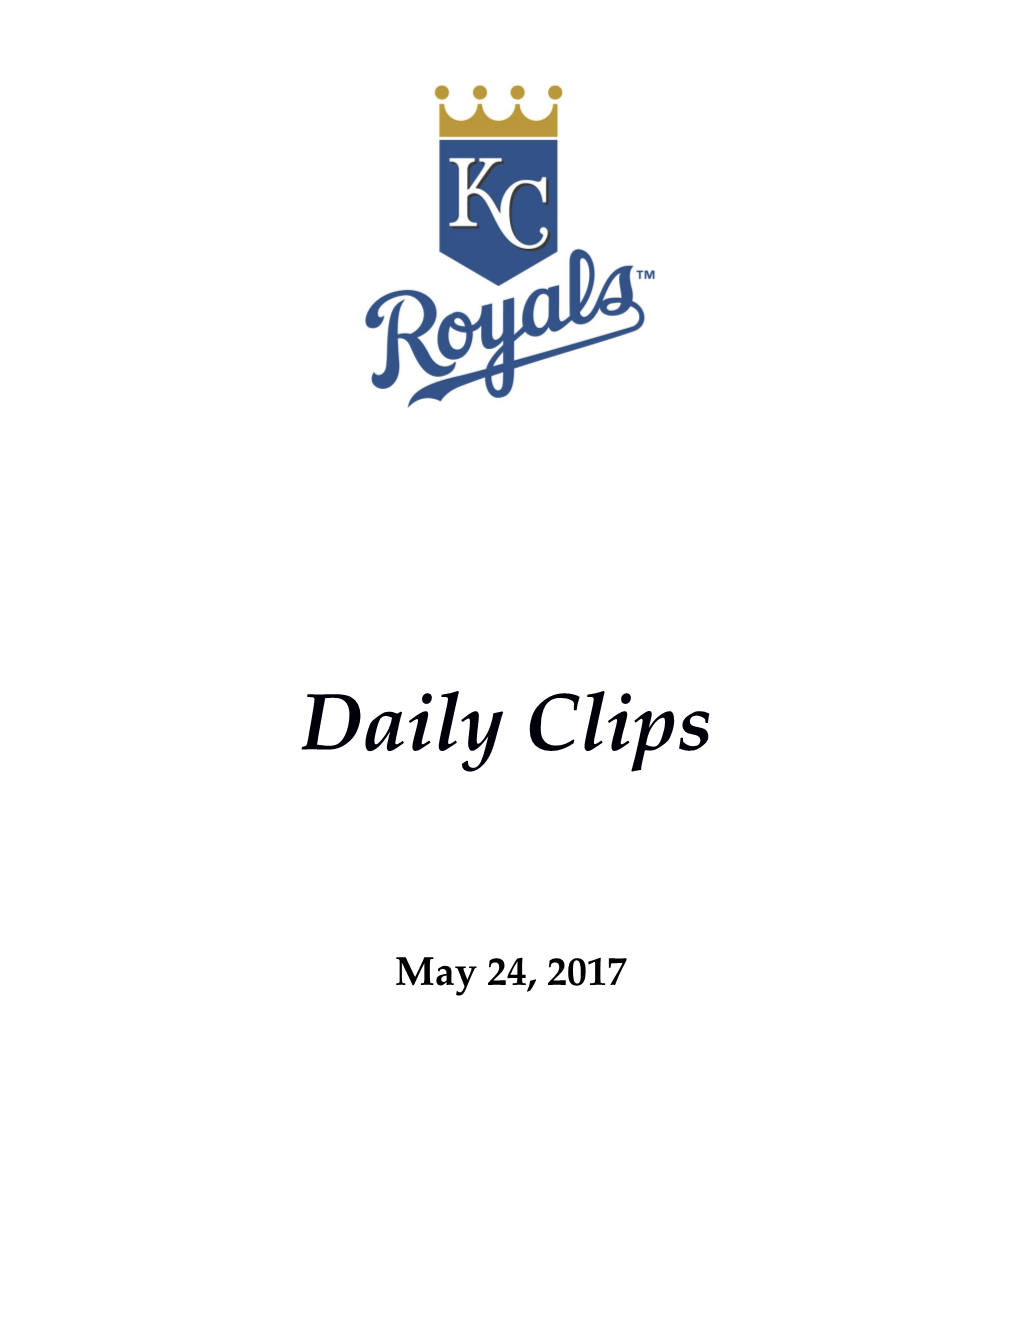 Royals Sock It to Yanks with 4 Late Home Runs